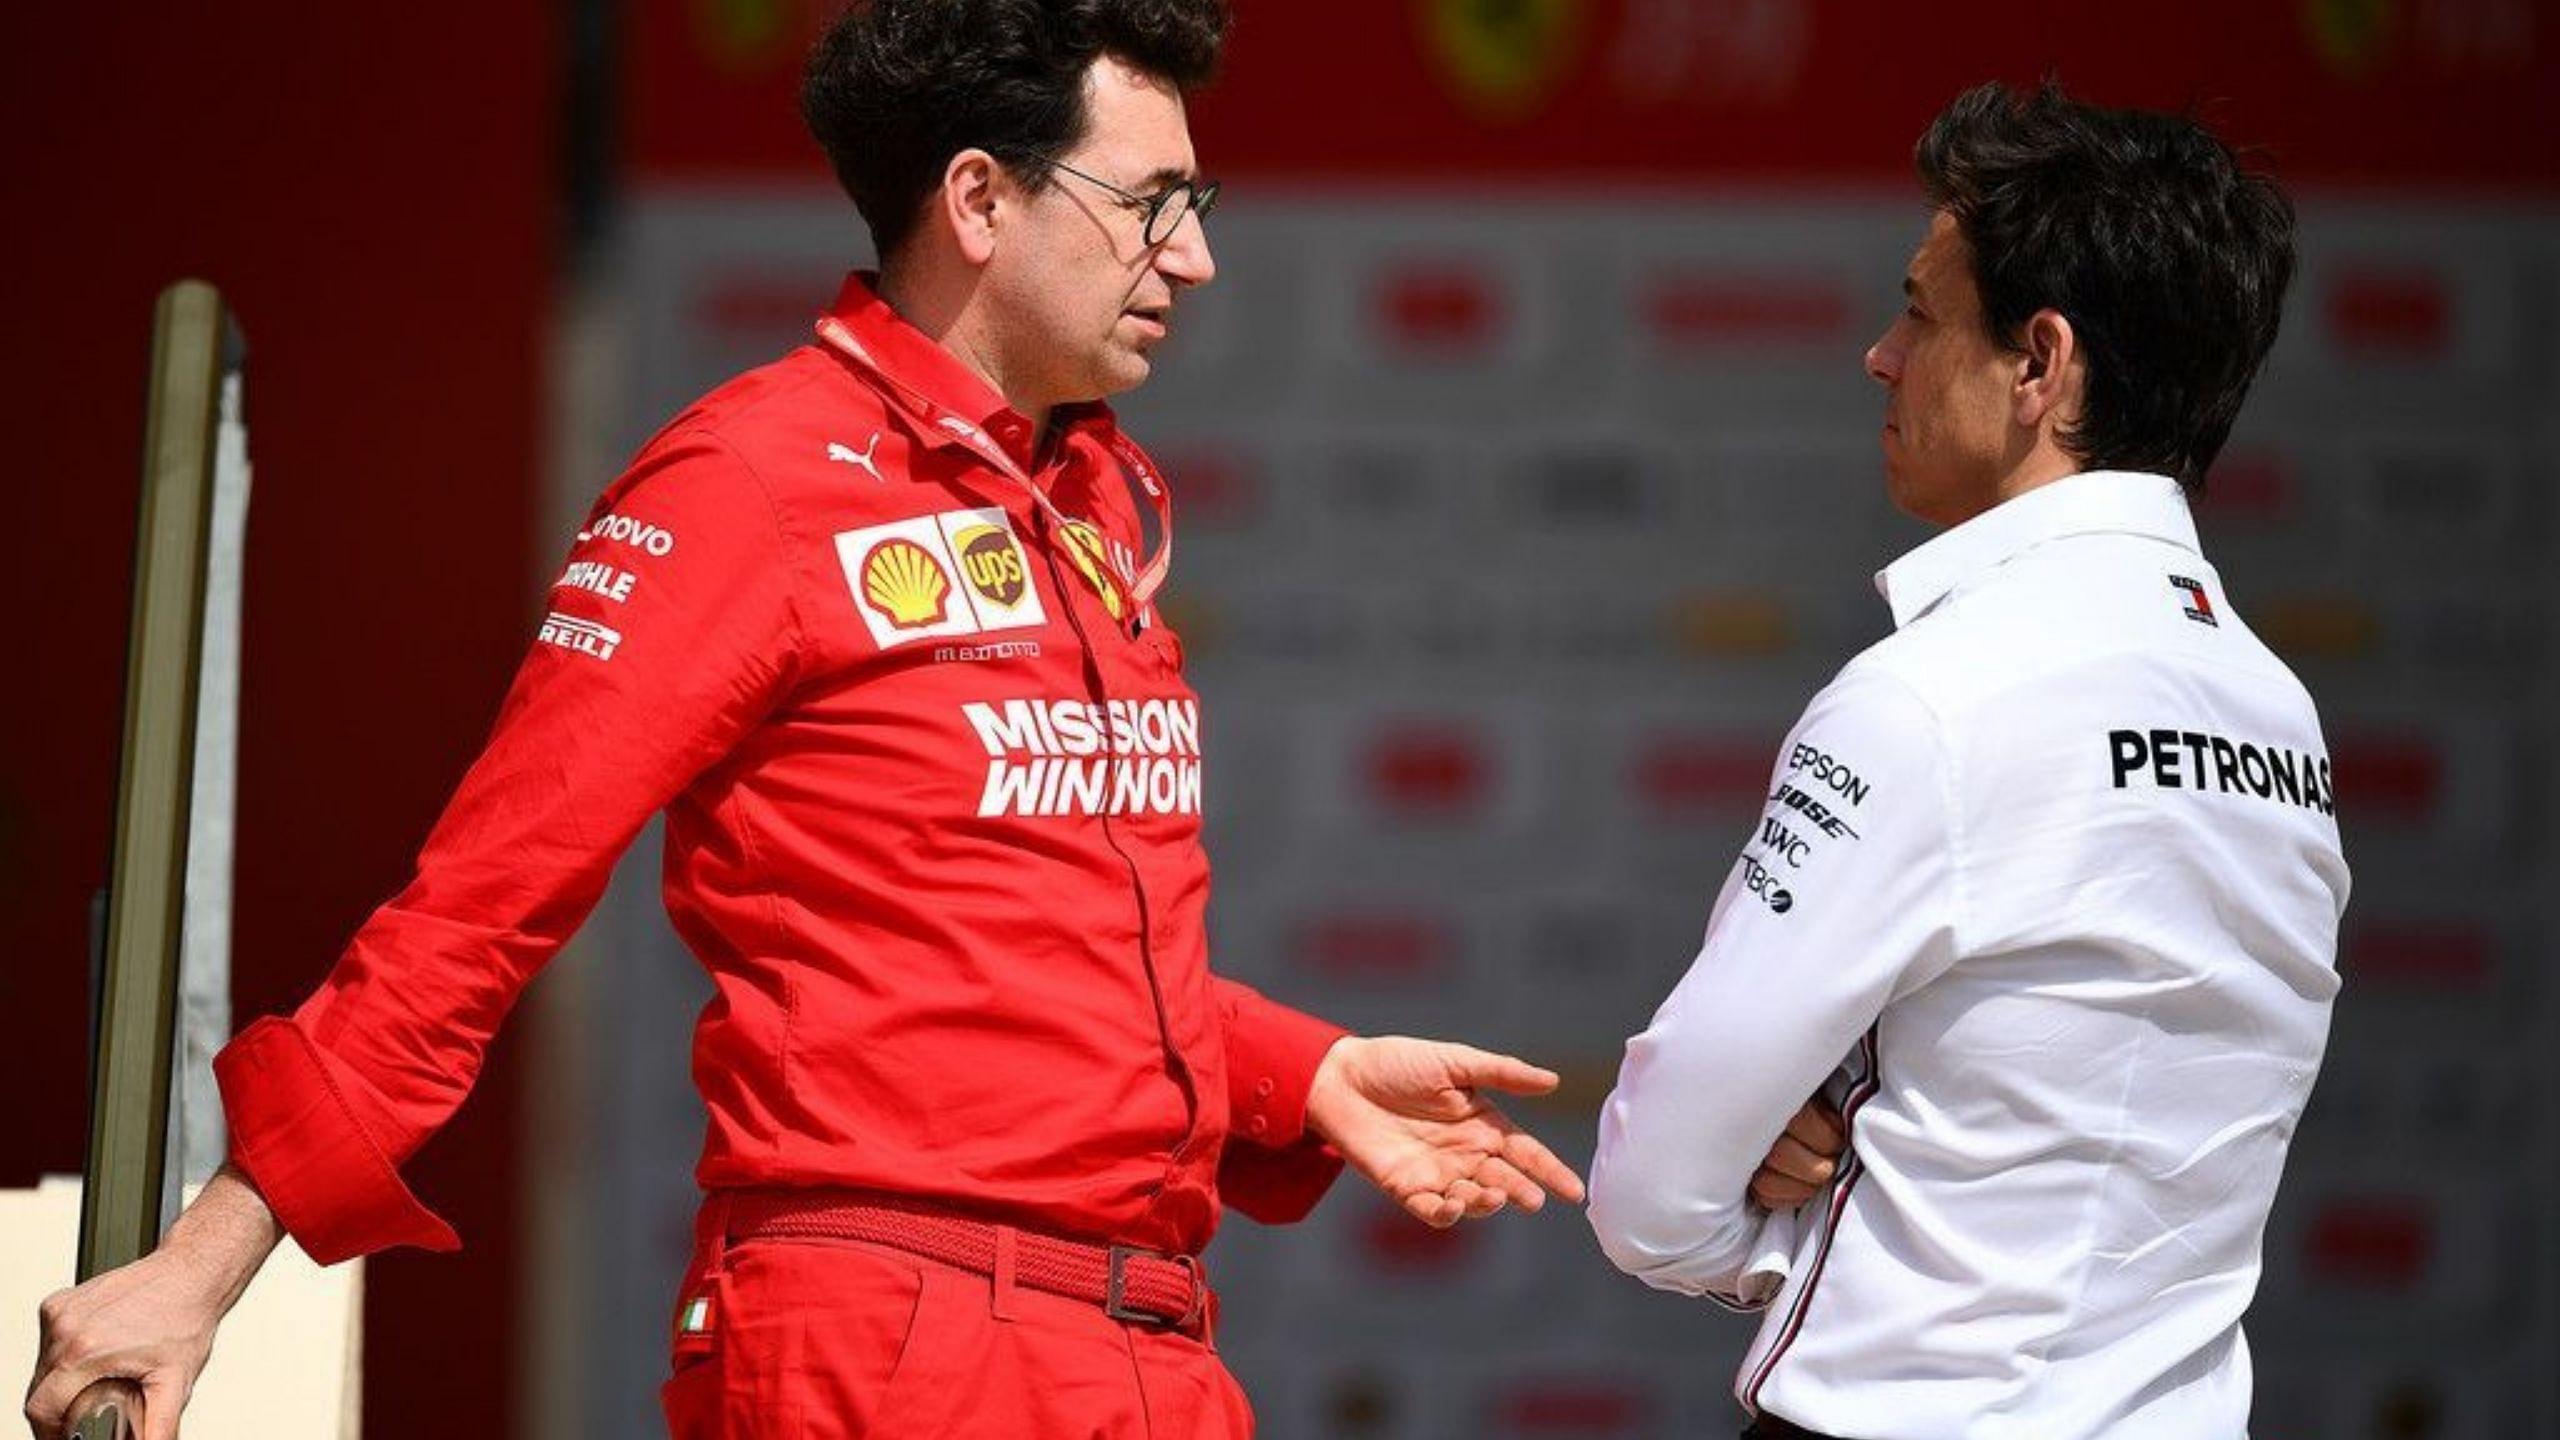 "We have seen enough examples": Toto Wolff trolls Ferrari for shambolic performances despite huge budget